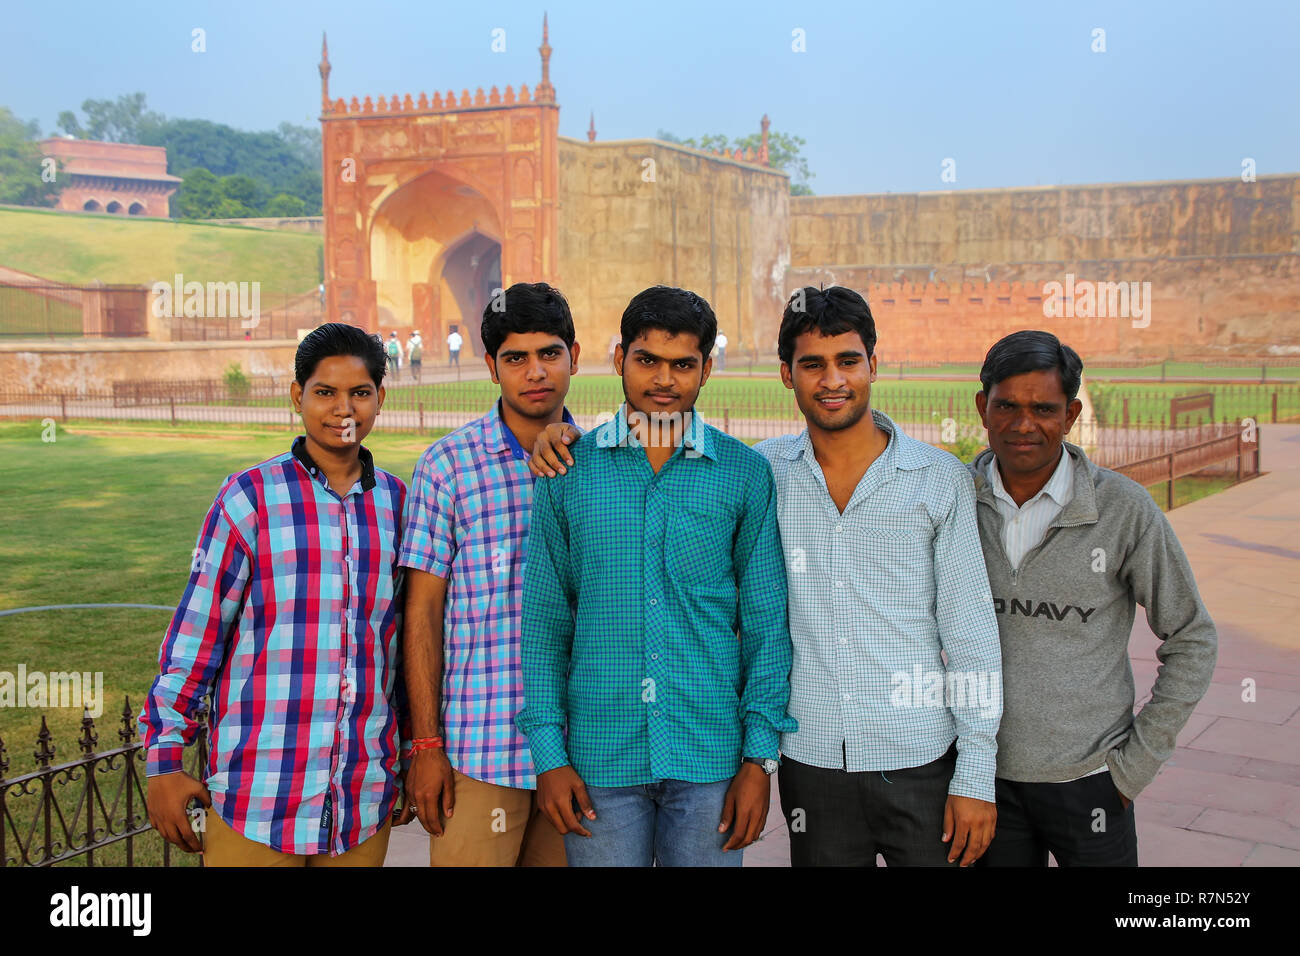 Local men standing in Agra Fort, Uttar Pradesh, India. The fort was built primarily as a military structure, but was later upgraded to a palace. Stock Photo